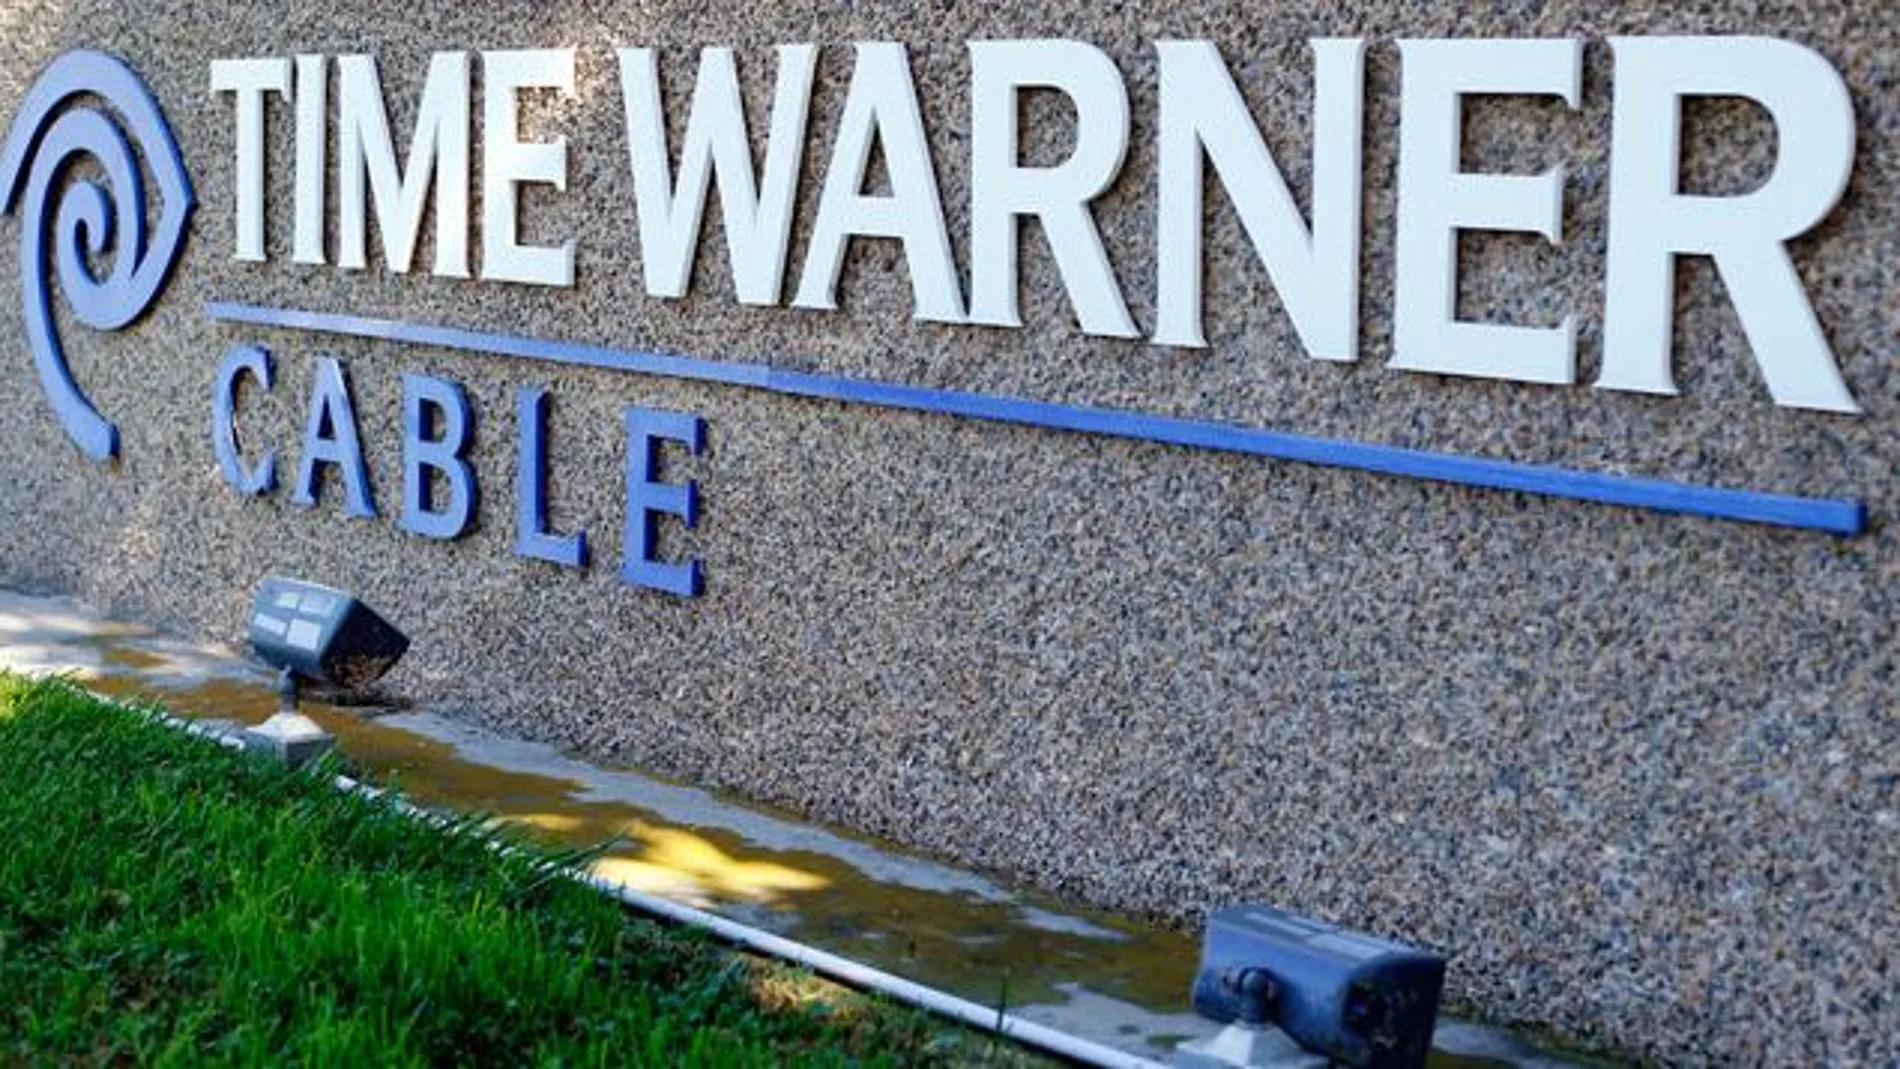 Charter adquiere Time Warner Cable por 72.105 millones